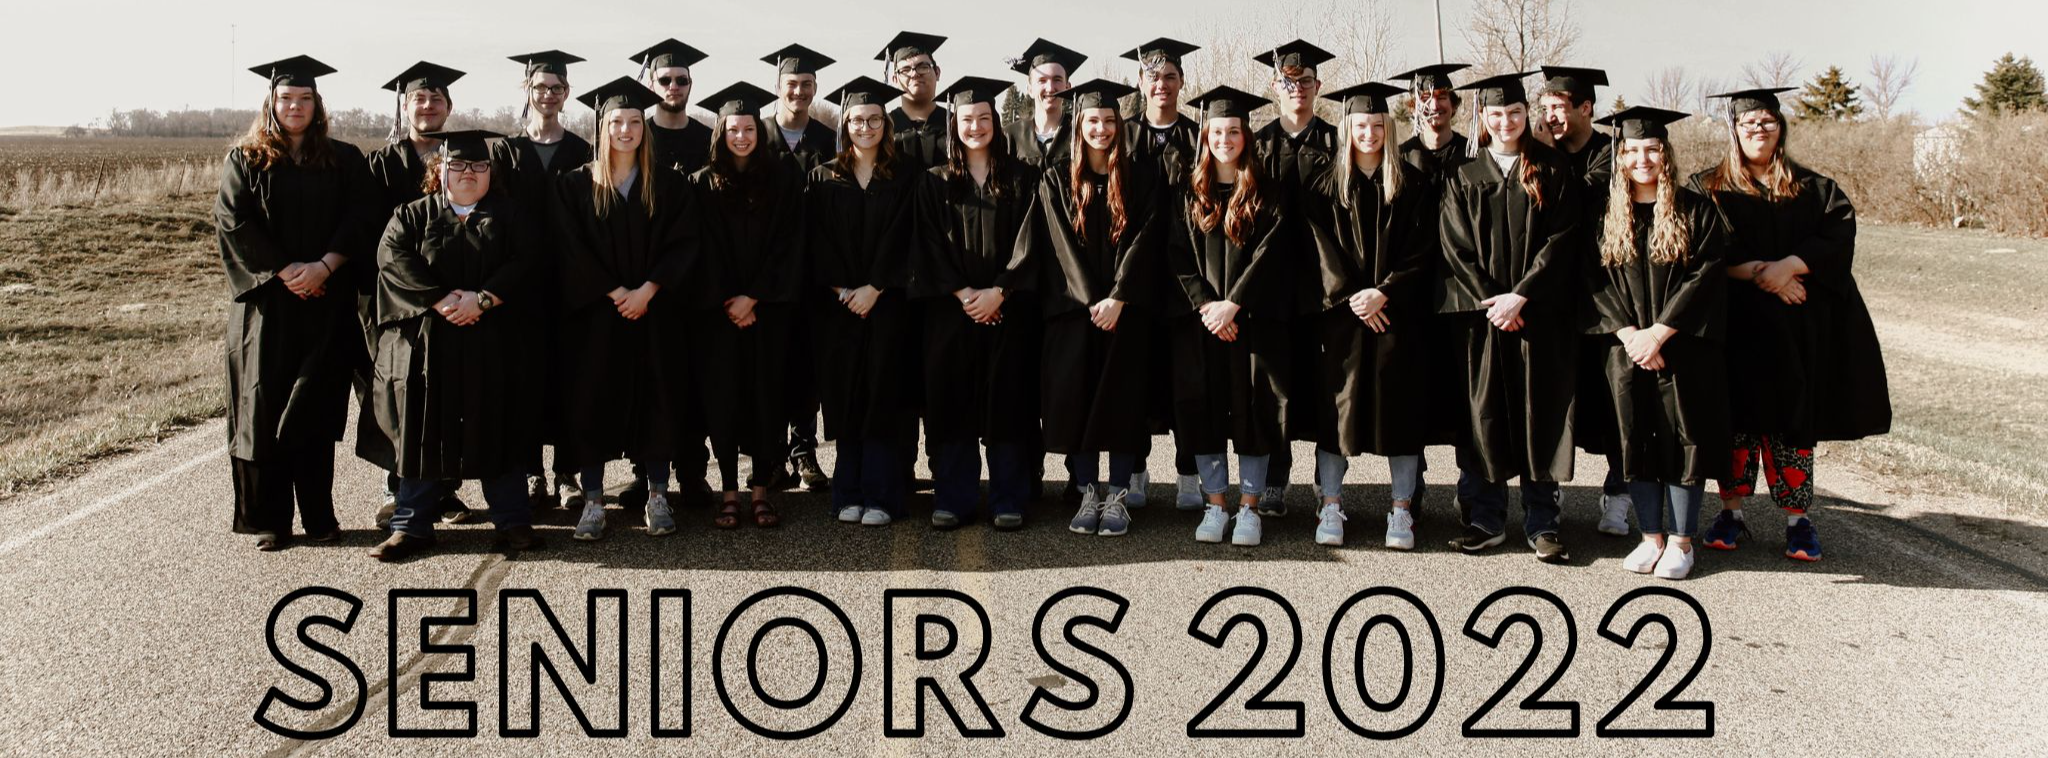 Seniors in Caps and Gowns